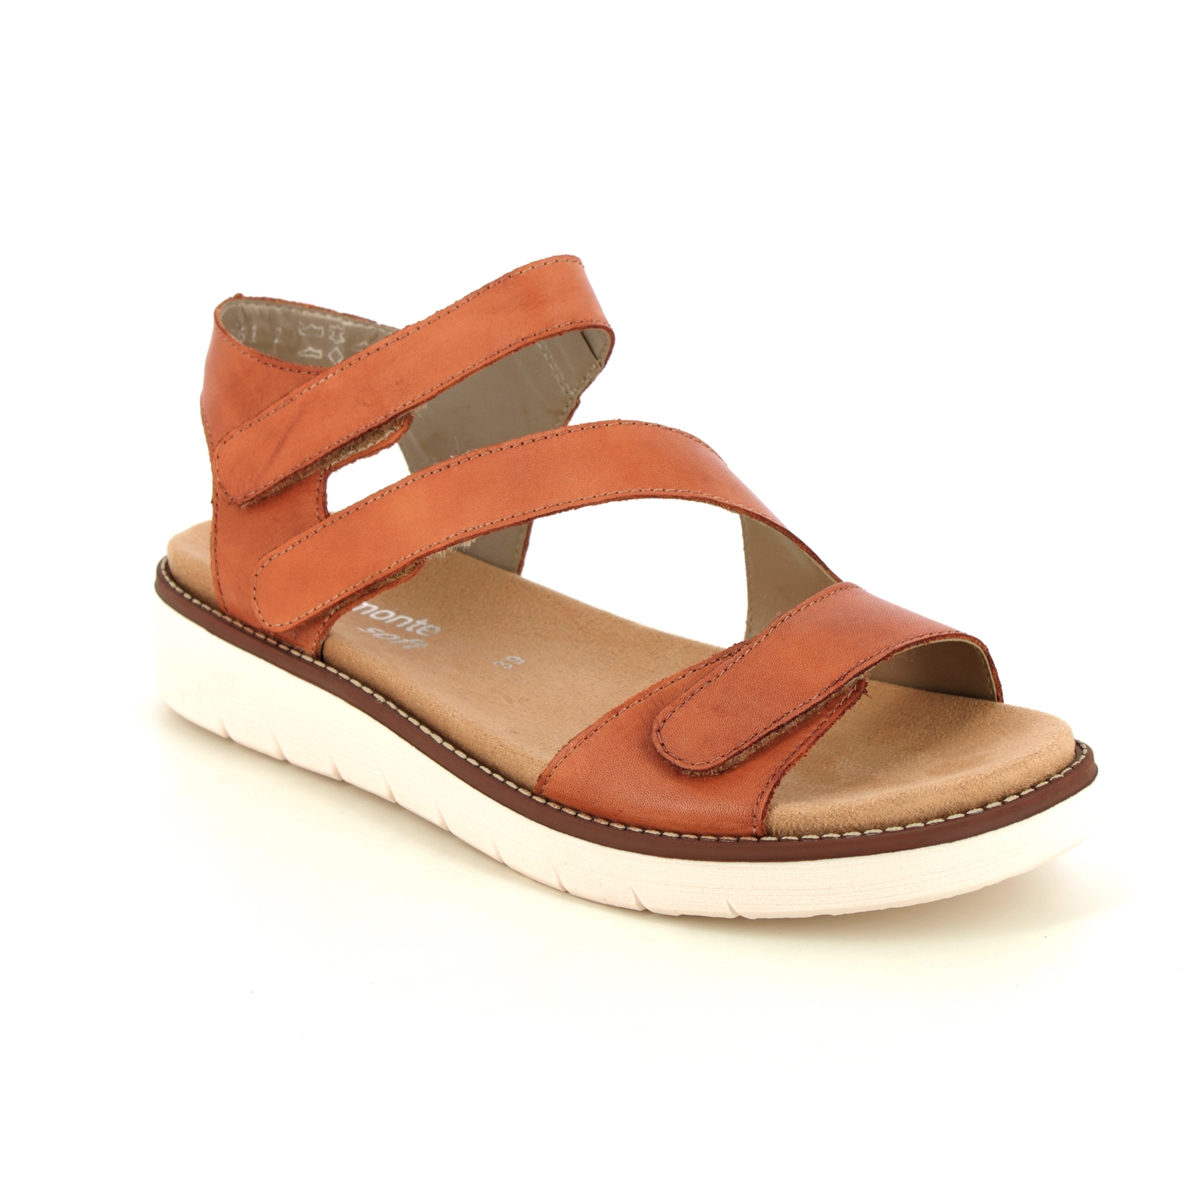 Remonte Marigo Tan Leather Womens Comfortable Sandals D2050-24 In Size 39 In Plain Tan Leather